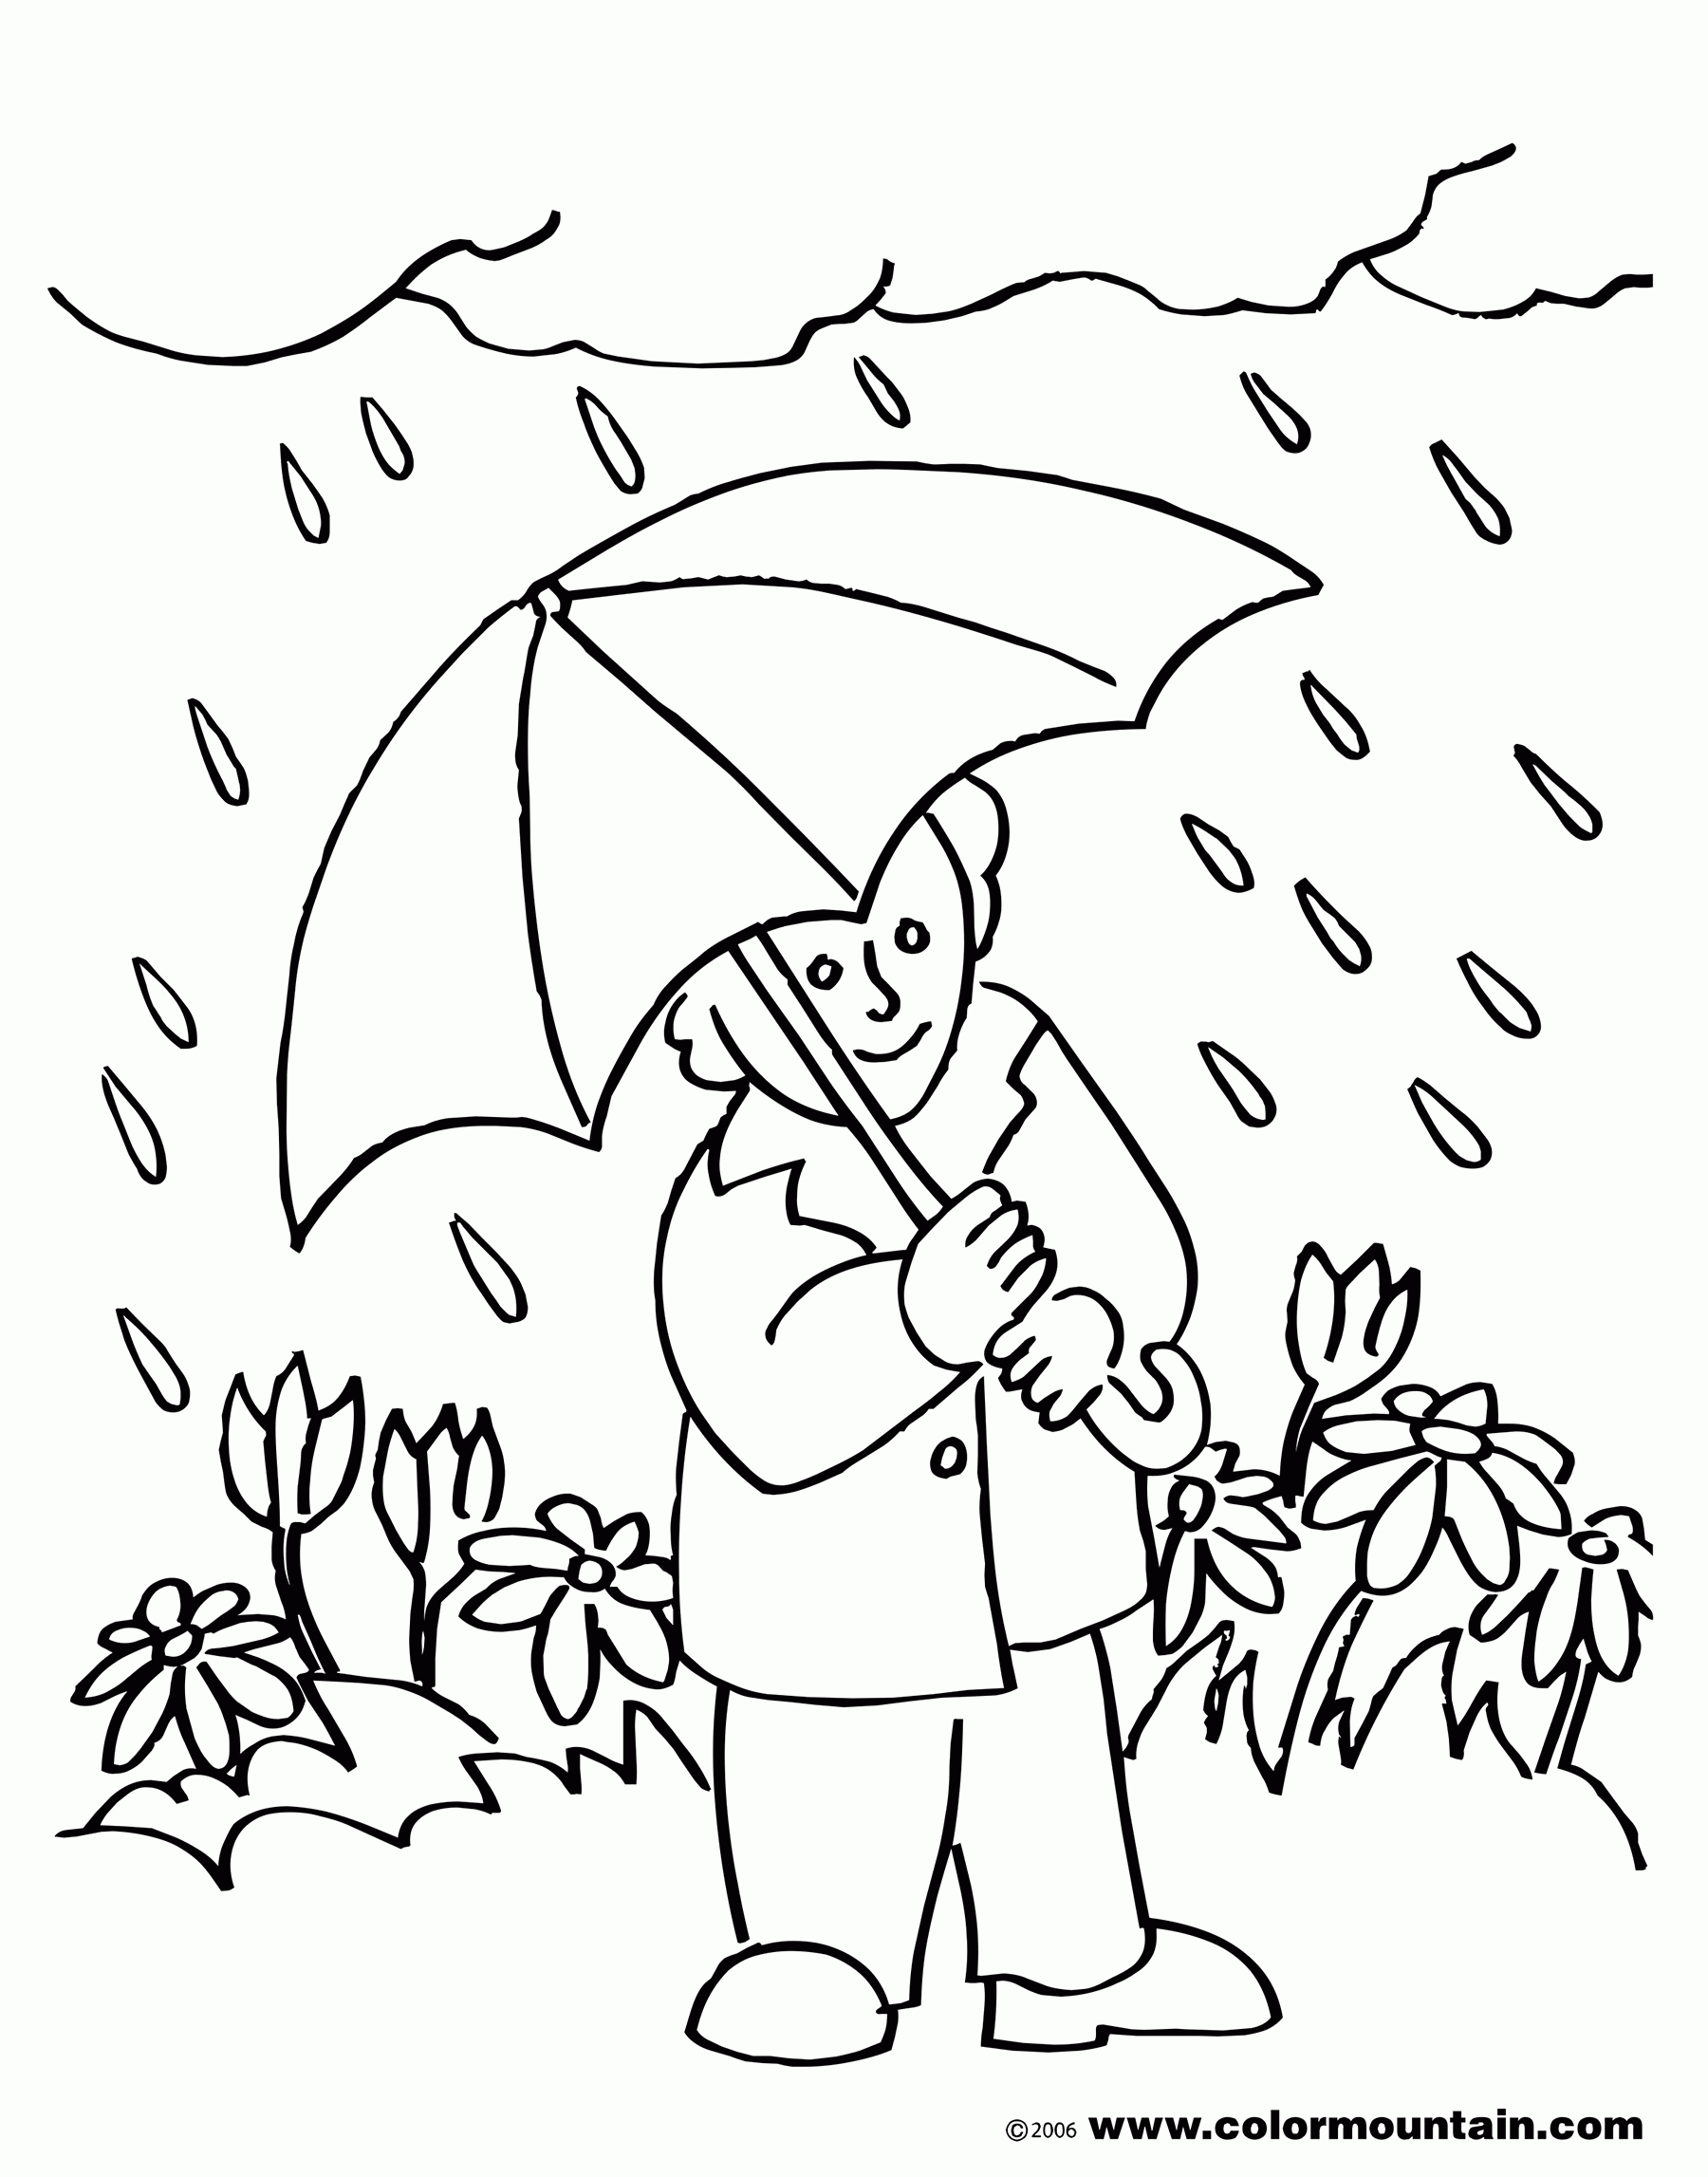 April Shower Spring Coloring Page - Coloring Pages For All Ages